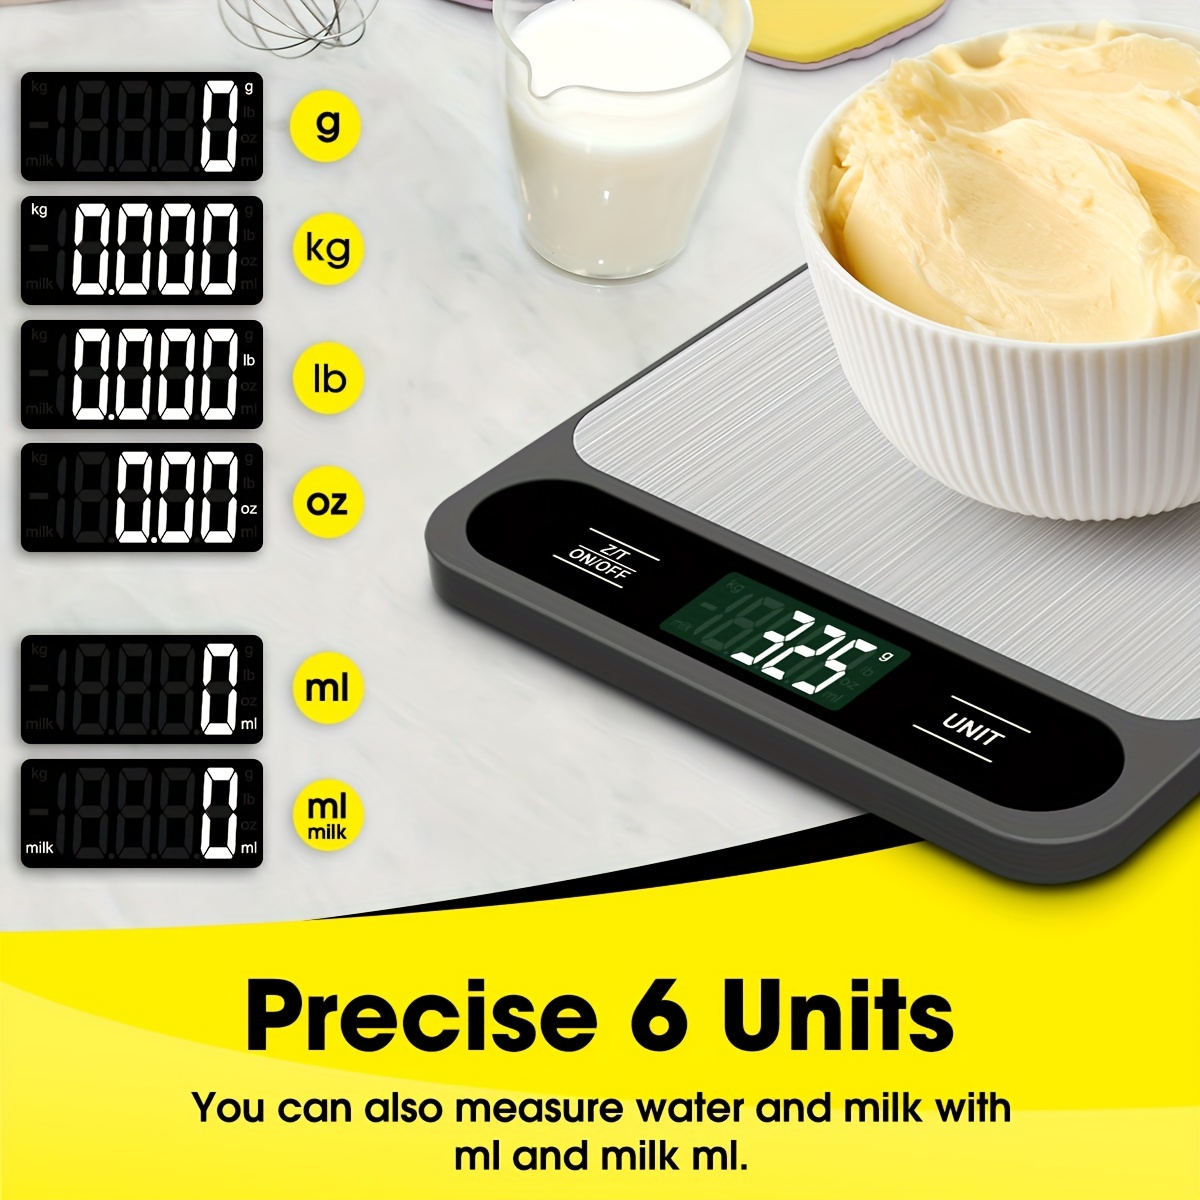 Digital Kitchen Scale, Small Food Weight Scale 1g-10kg with Stainless Steel  Platform Black